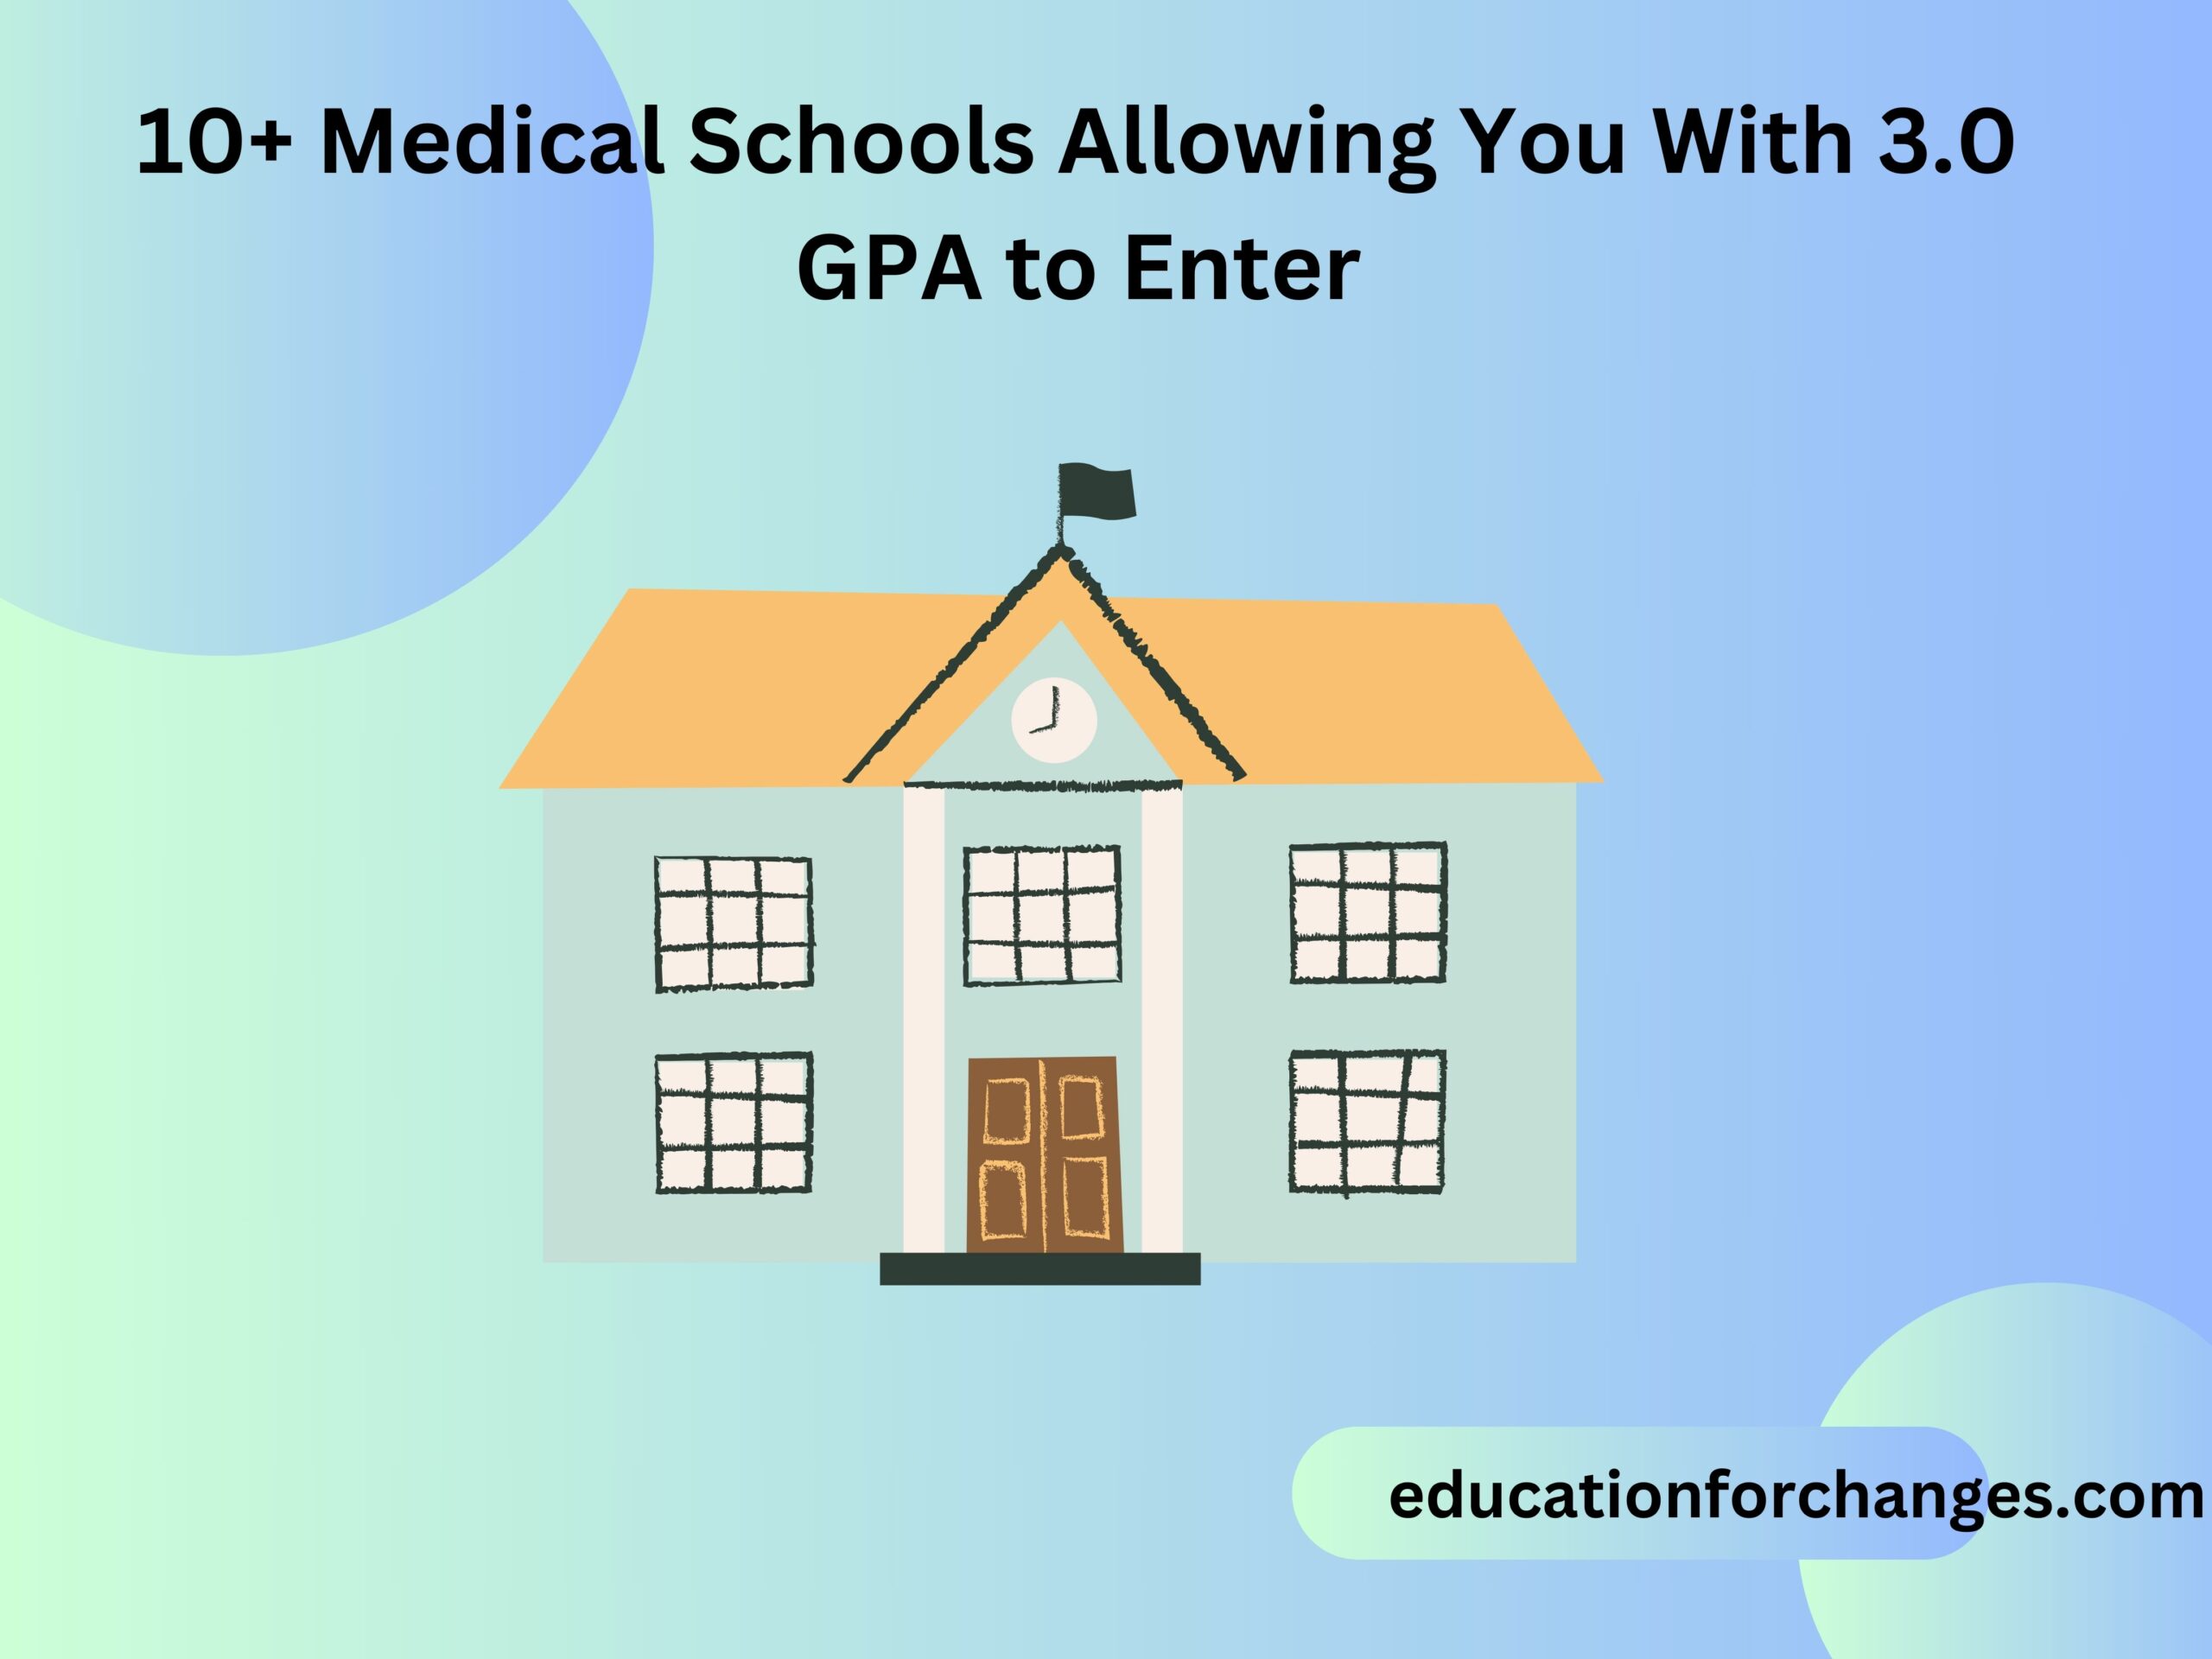 10+ Medical Schools Allowing You With 3.0 GPA to Enter